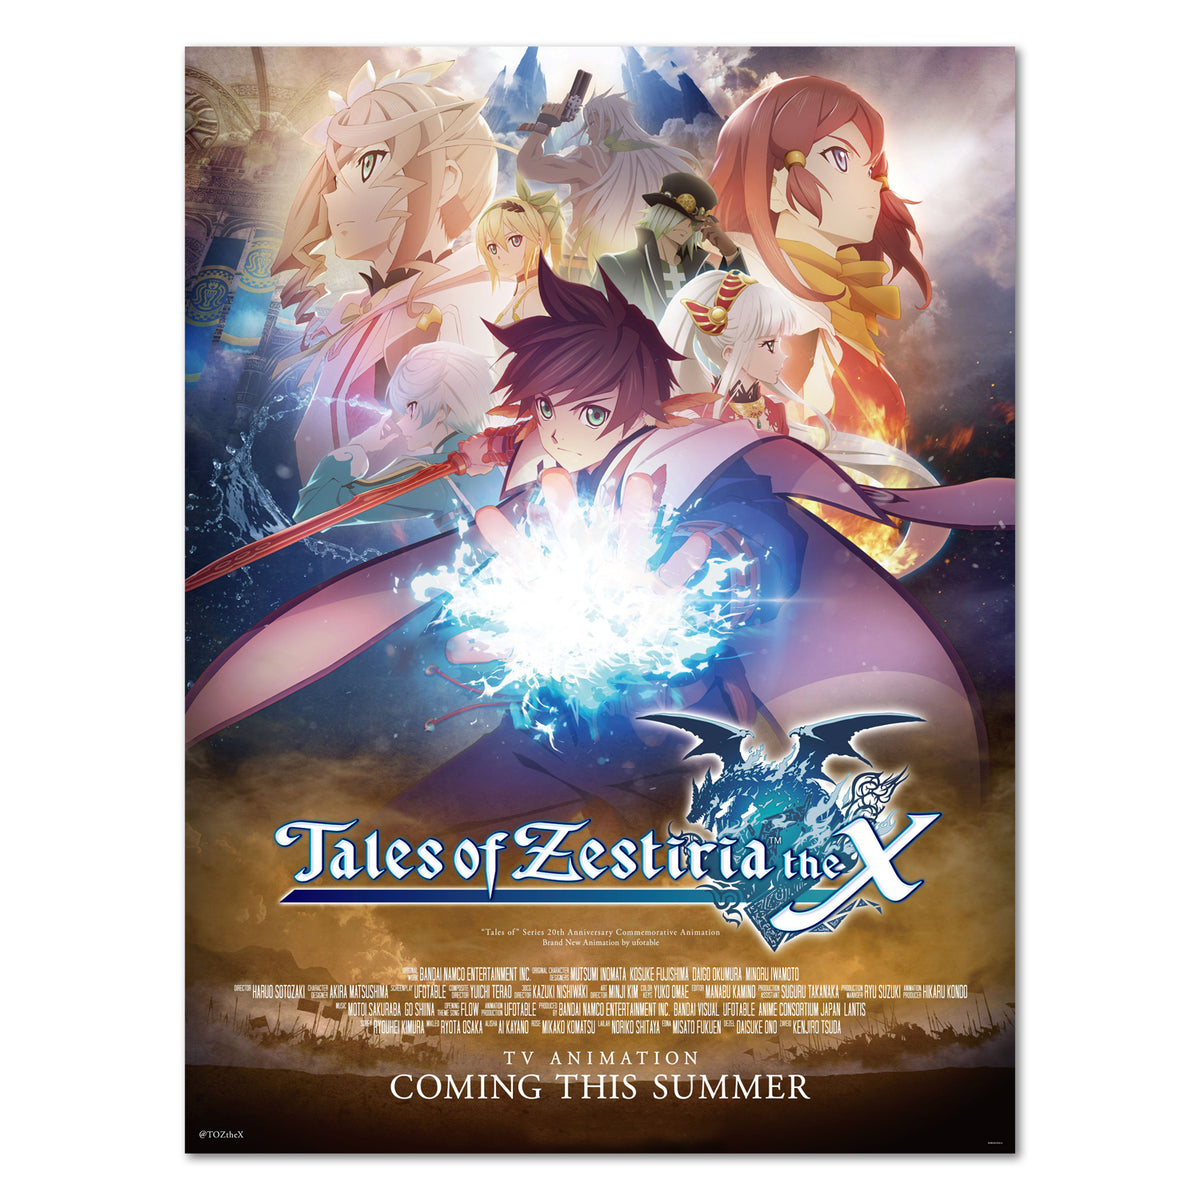 Another Tales of Zestiria the X Theater Pre-Screening, Blu-ray Box